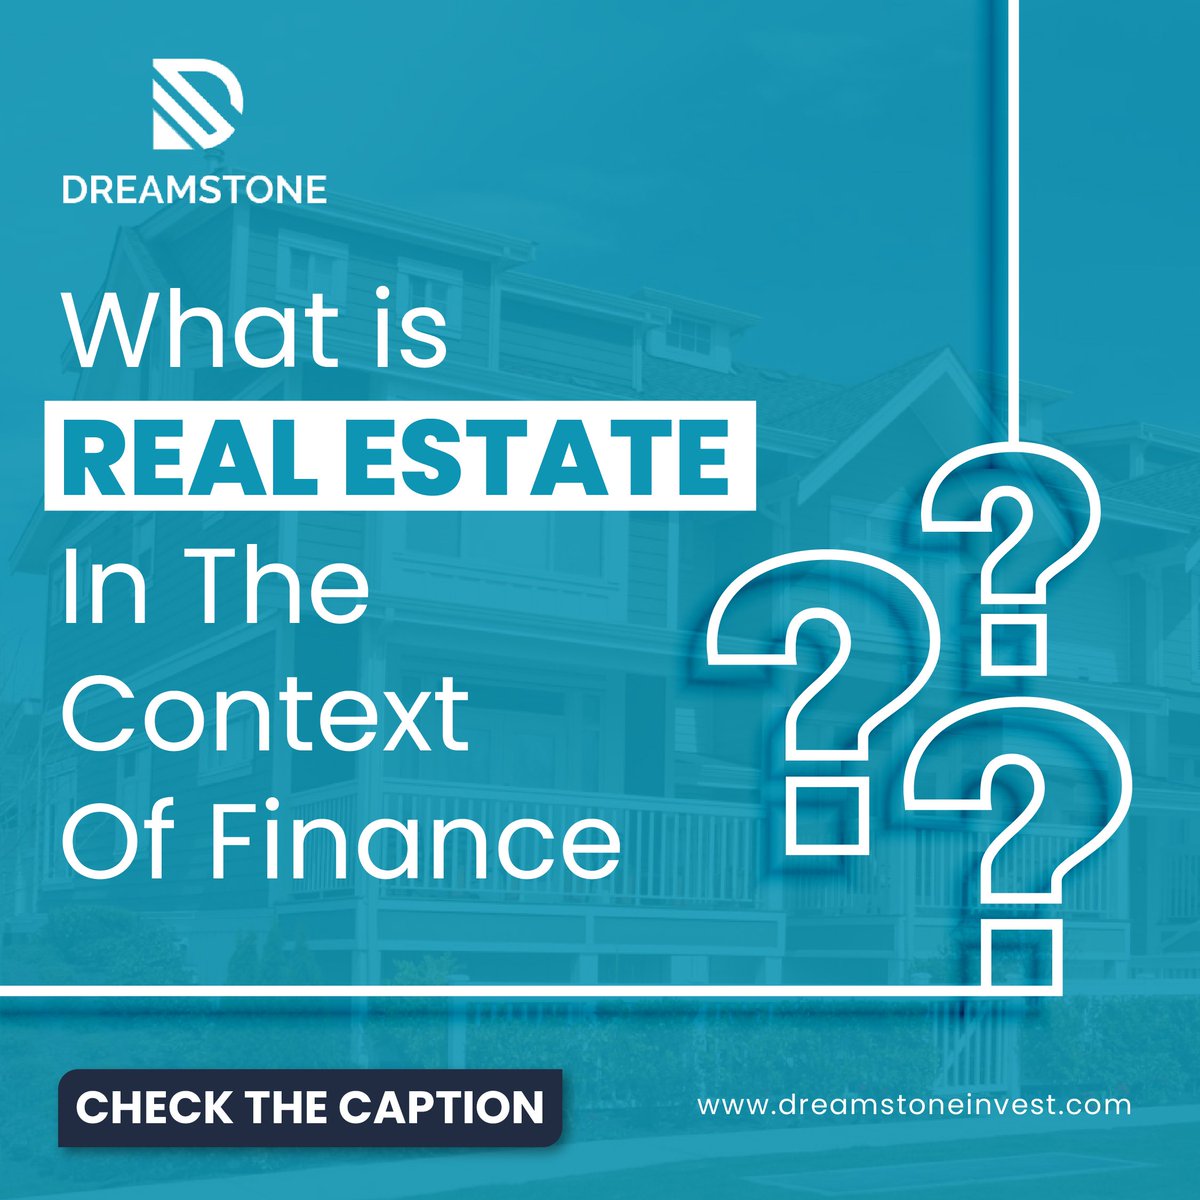 Real estate in finance refers to physical land, property, and structures like buildings. There are two main types of real estate investments: private and public.

#financejargon #dreamstone #salesandtrading #asset #stock #equity #fixedincome #commodities #realestate